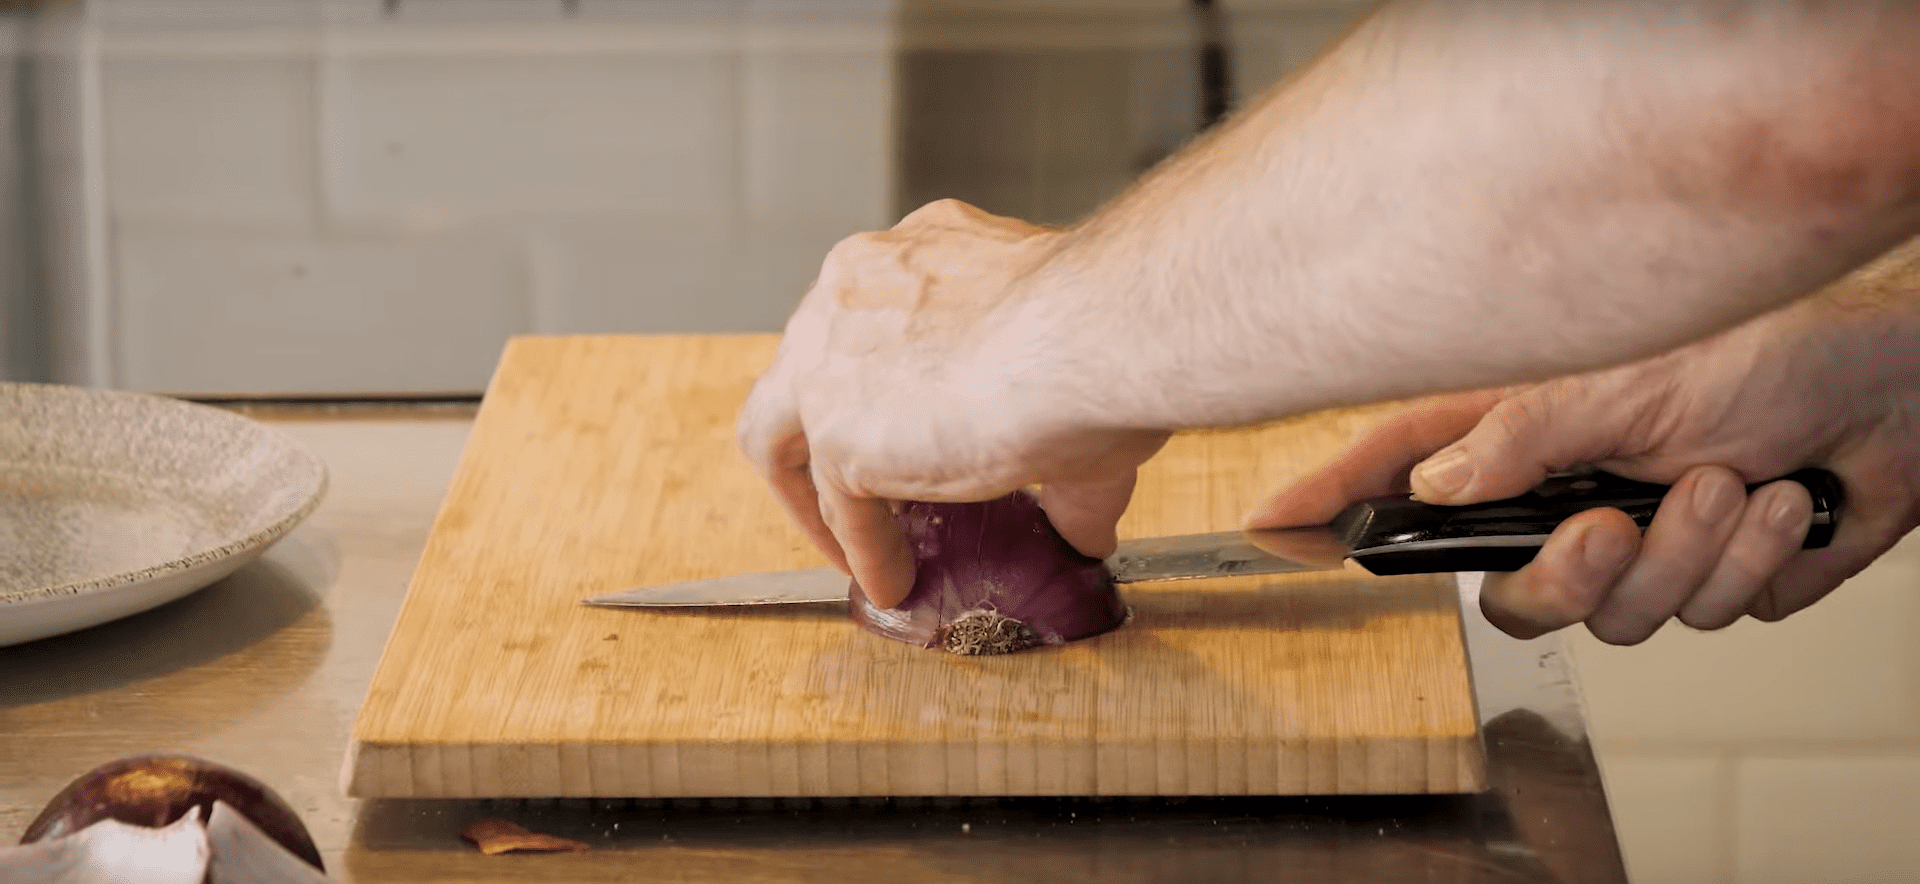 Belfast Cookery School - How To Chop An Onion